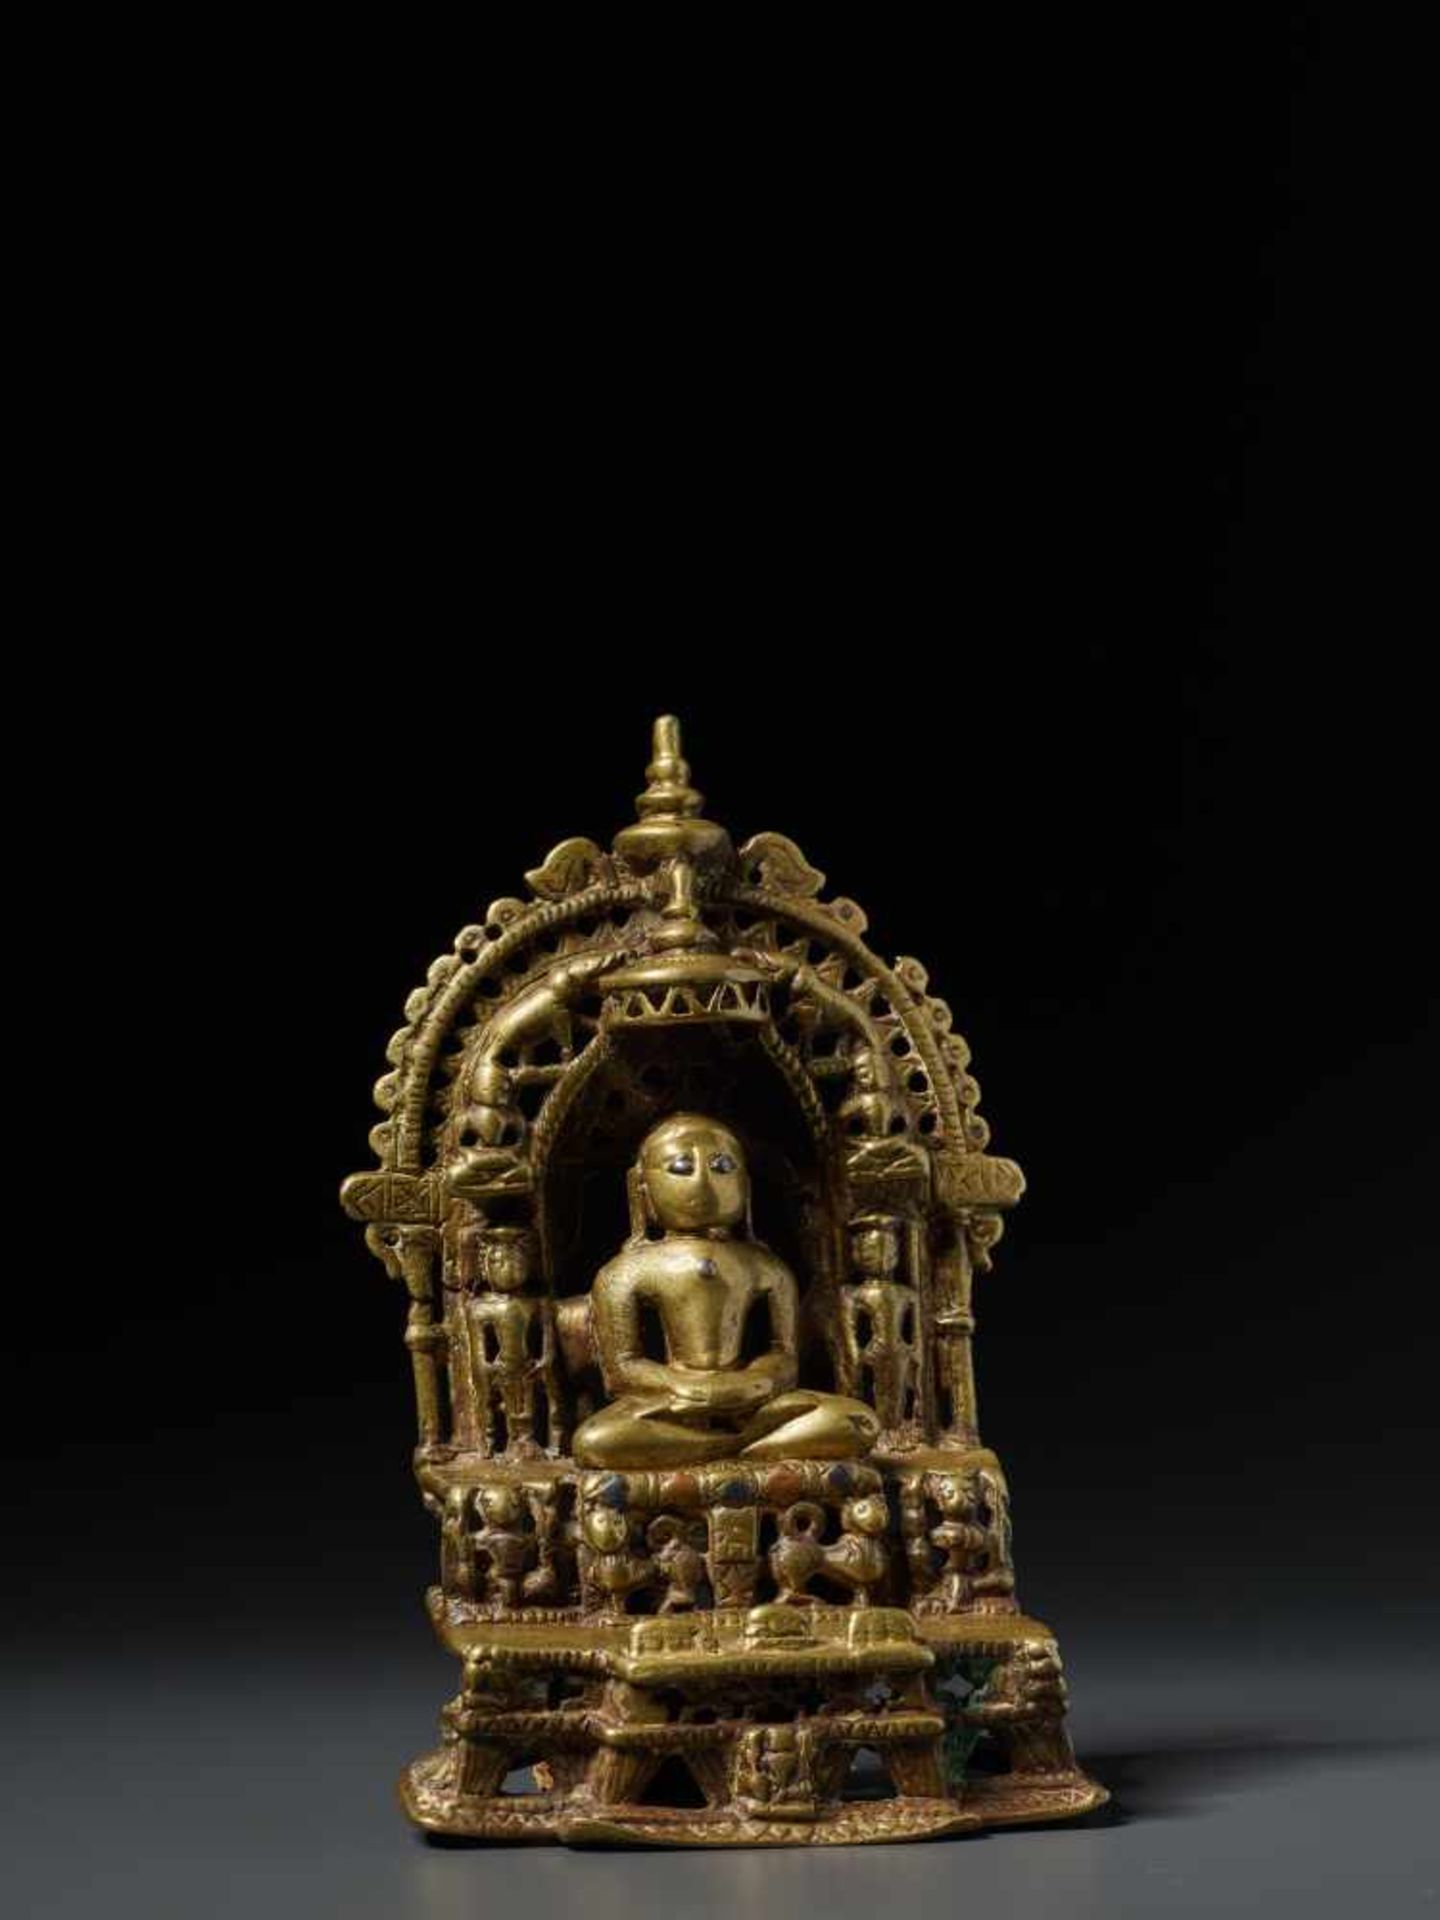 A SILVER AND COPPER INLAID JAIN BRASS SHRINE WITH MAHAVIRA, 15th – 16th CENTURY Brass with copper - Image 3 of 8